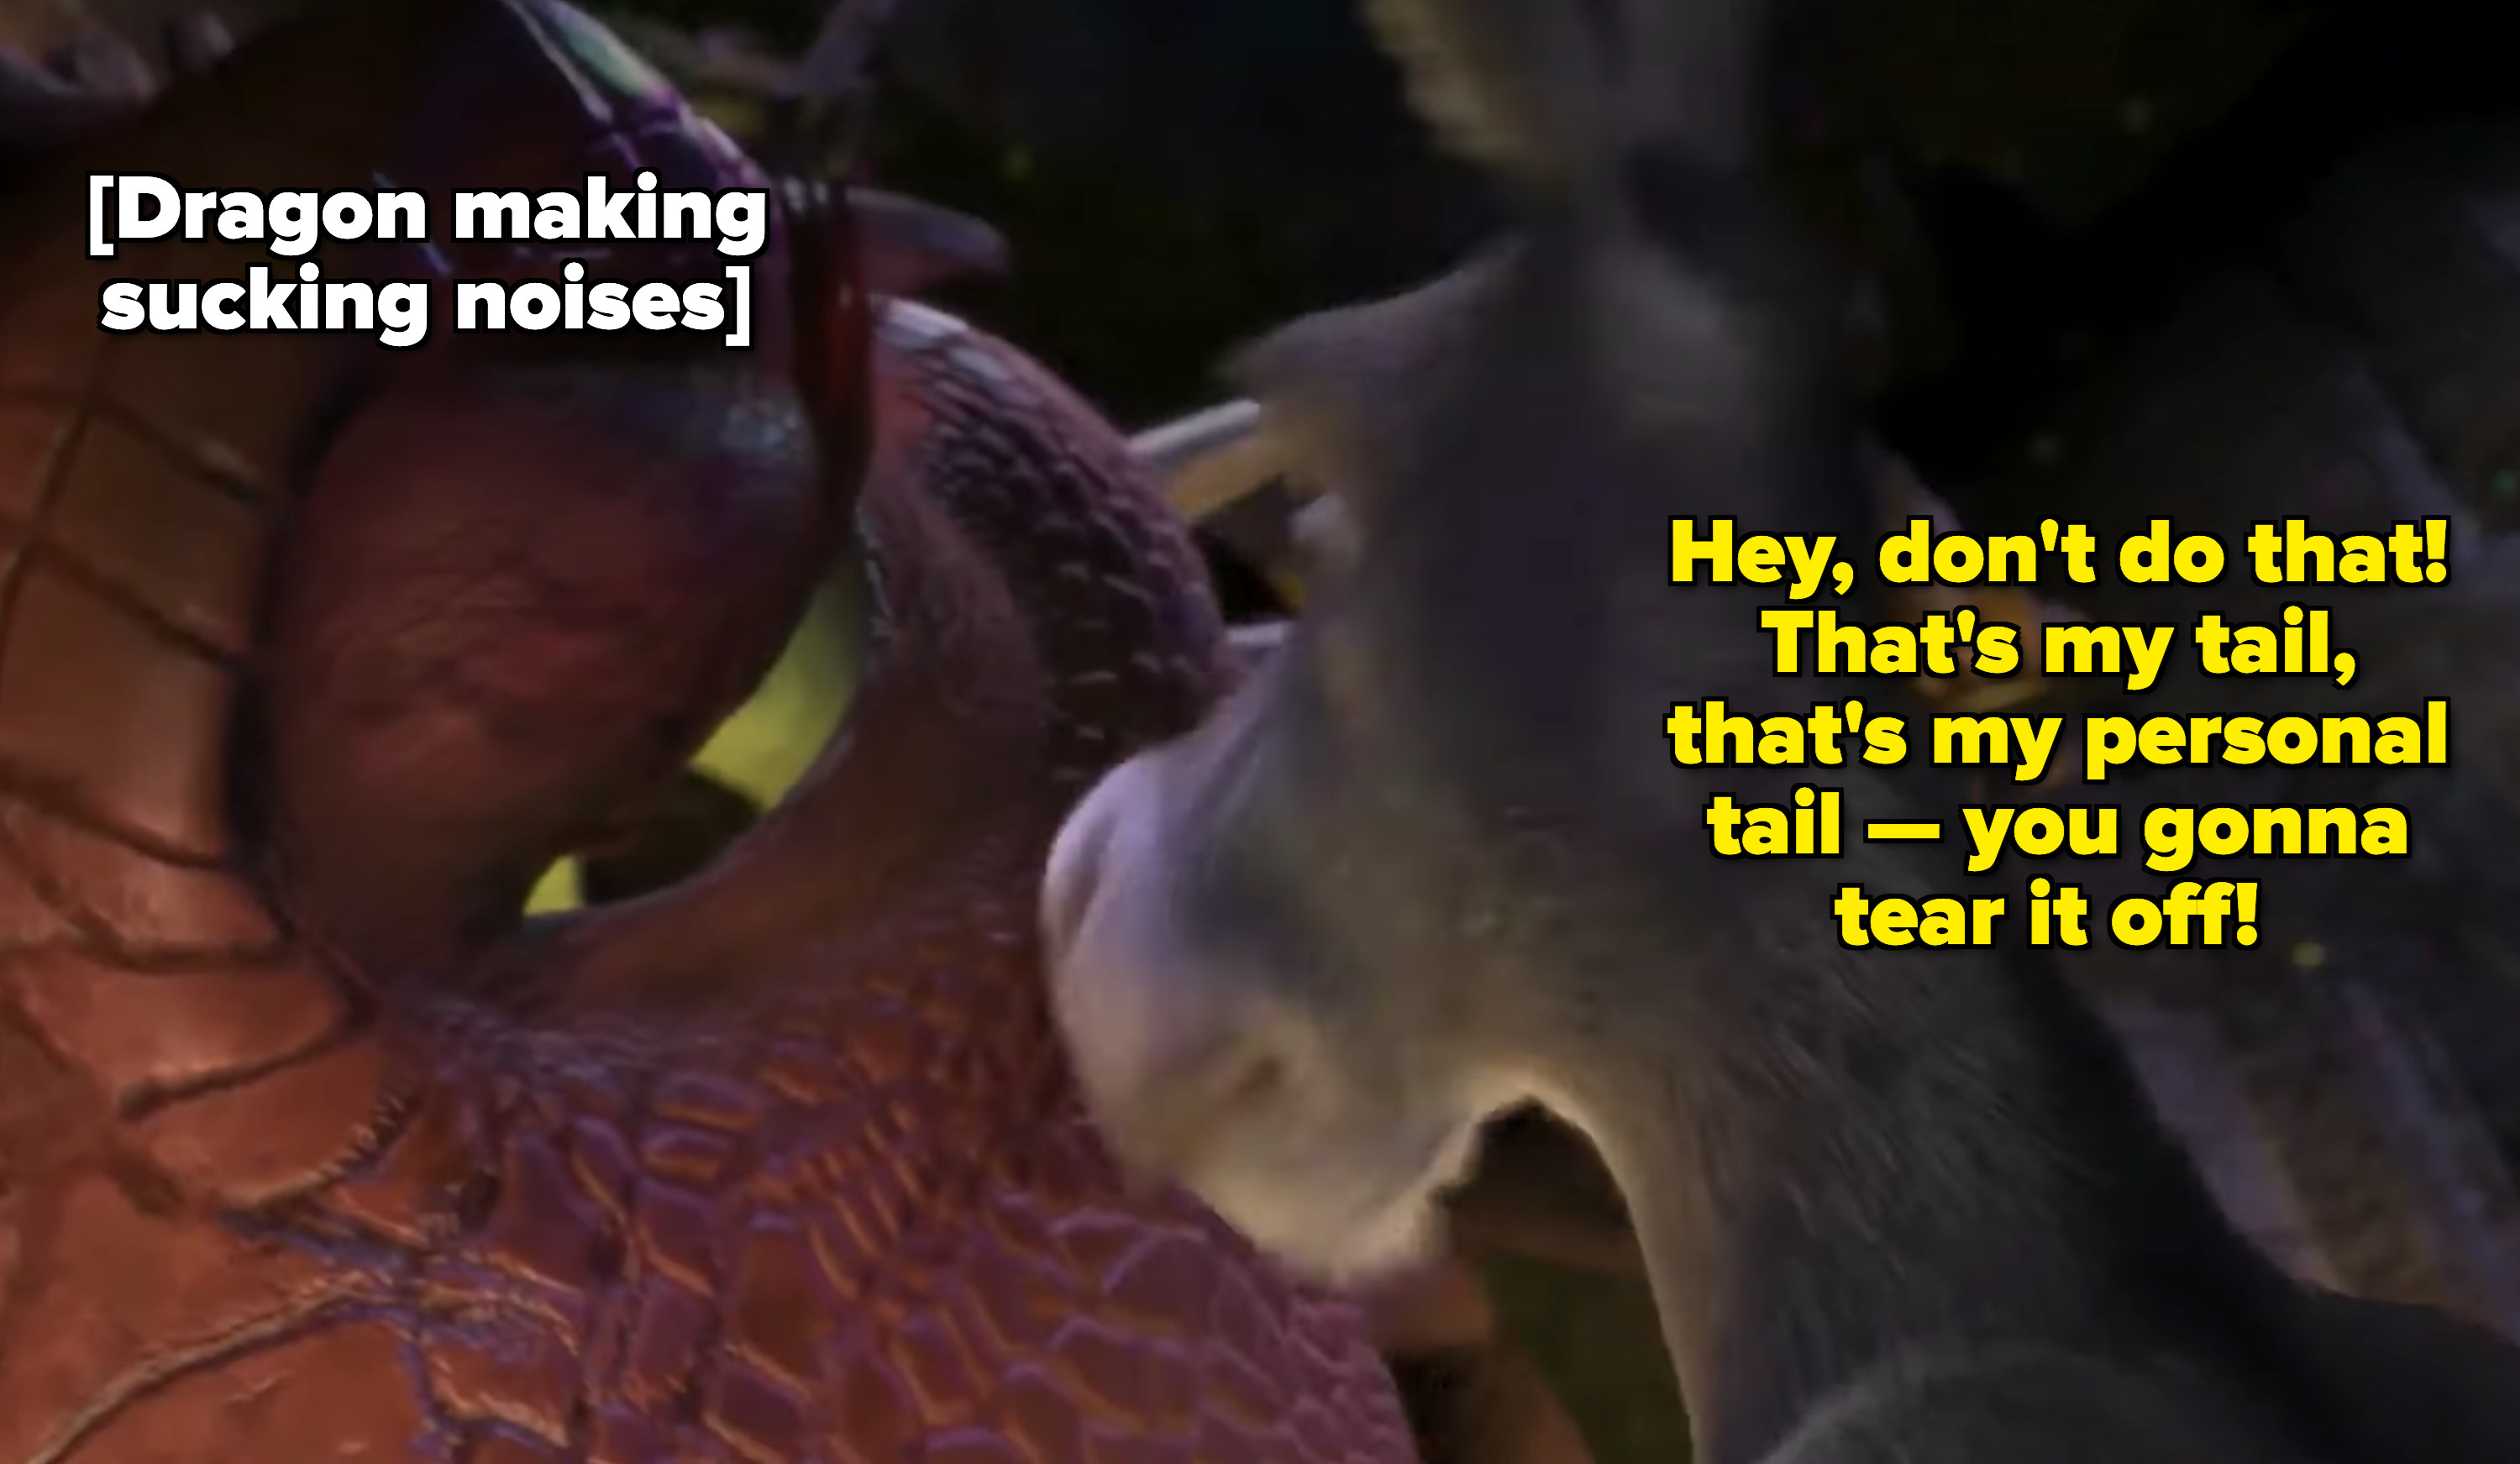 Donkey yelling at Dragon: &quot;Hey, don&#x27;t do that! That&#x27;s my tail, my personal tail -- you gonna tear it off!&quot;